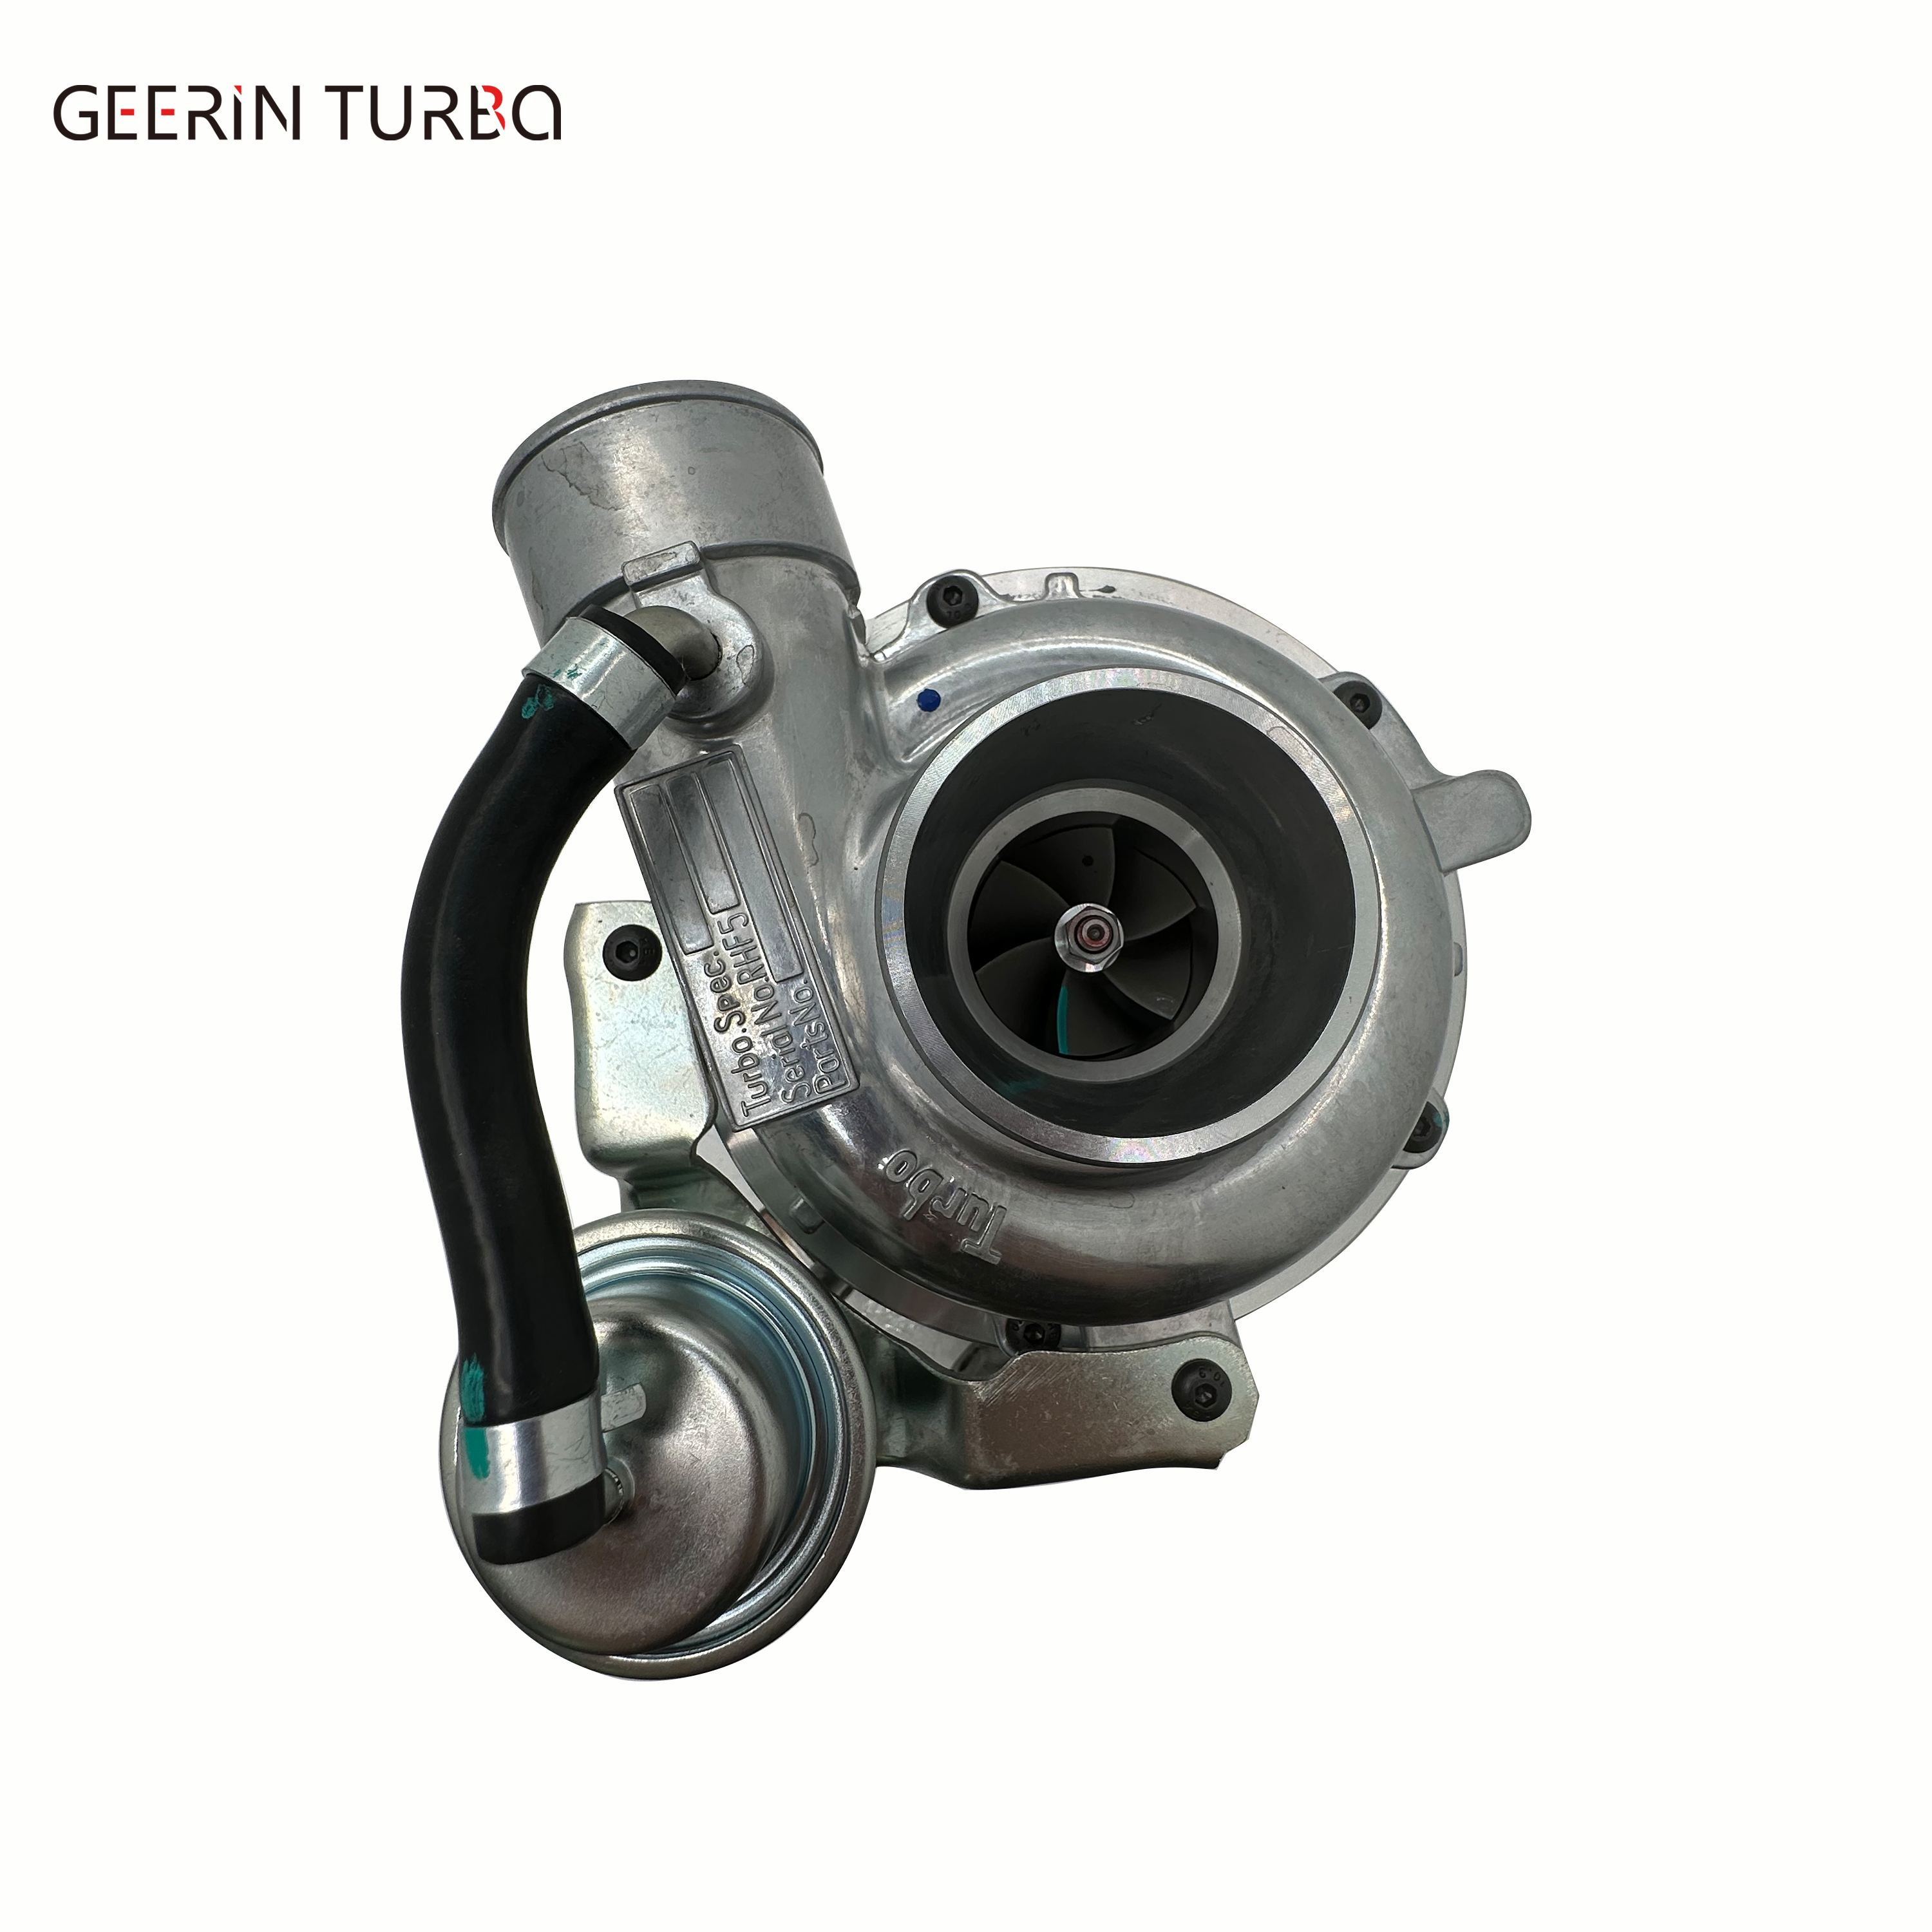 RHF5 Turbocharger Complete 8973125140 VB430015 8972572000 8971371093 Full Turbo For Opel Monterey B 3.0L 117Kw 4JX1 1998-1999 Factory